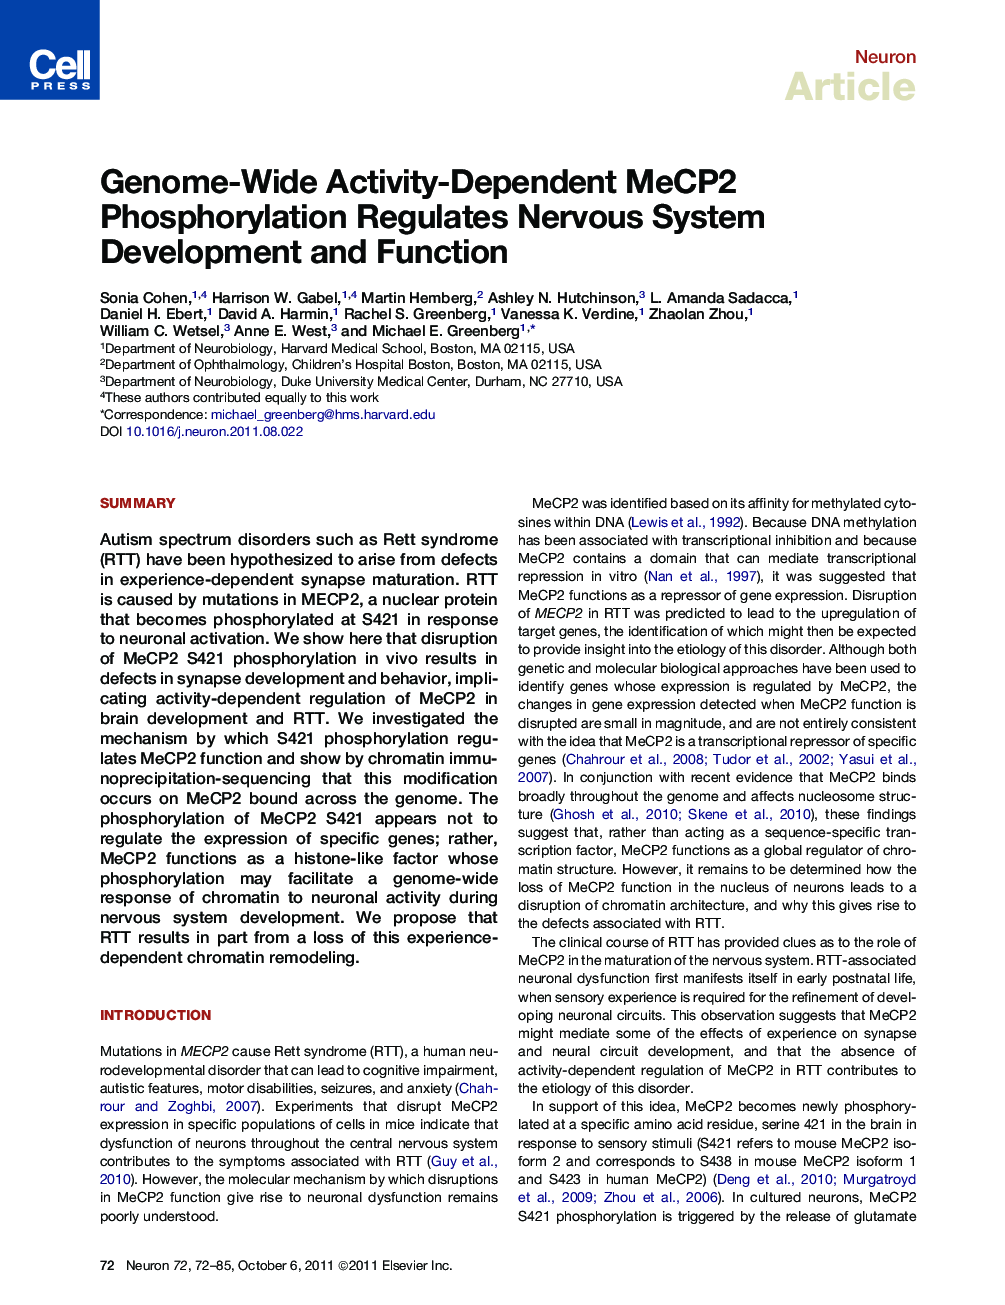 Genome-Wide Activity-Dependent MeCP2 Phosphorylation Regulates Nervous System Development and Function